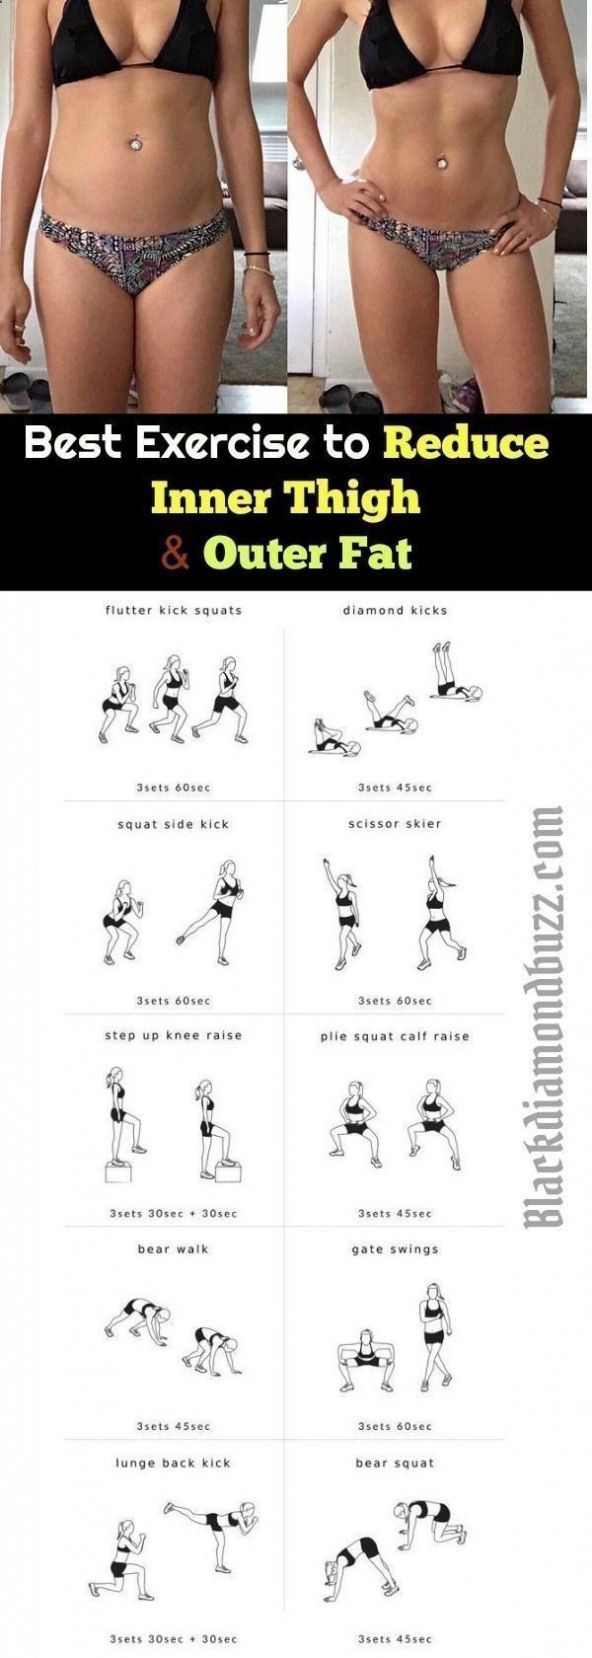 Belly Fat Workout - Fat Fast Shrinking Signal Diet-Recipes Best Exercise to Reduce Inner Thigh and Outer Fat Fast in a Week: In the exercise you will learn how to get rid of that suborn thigh fat and hips fat at home by eva.ritz  Follow PowerRecipes For #Howtoburnbellyfatinaweek -   18 fitness workouts thighs
 ideas